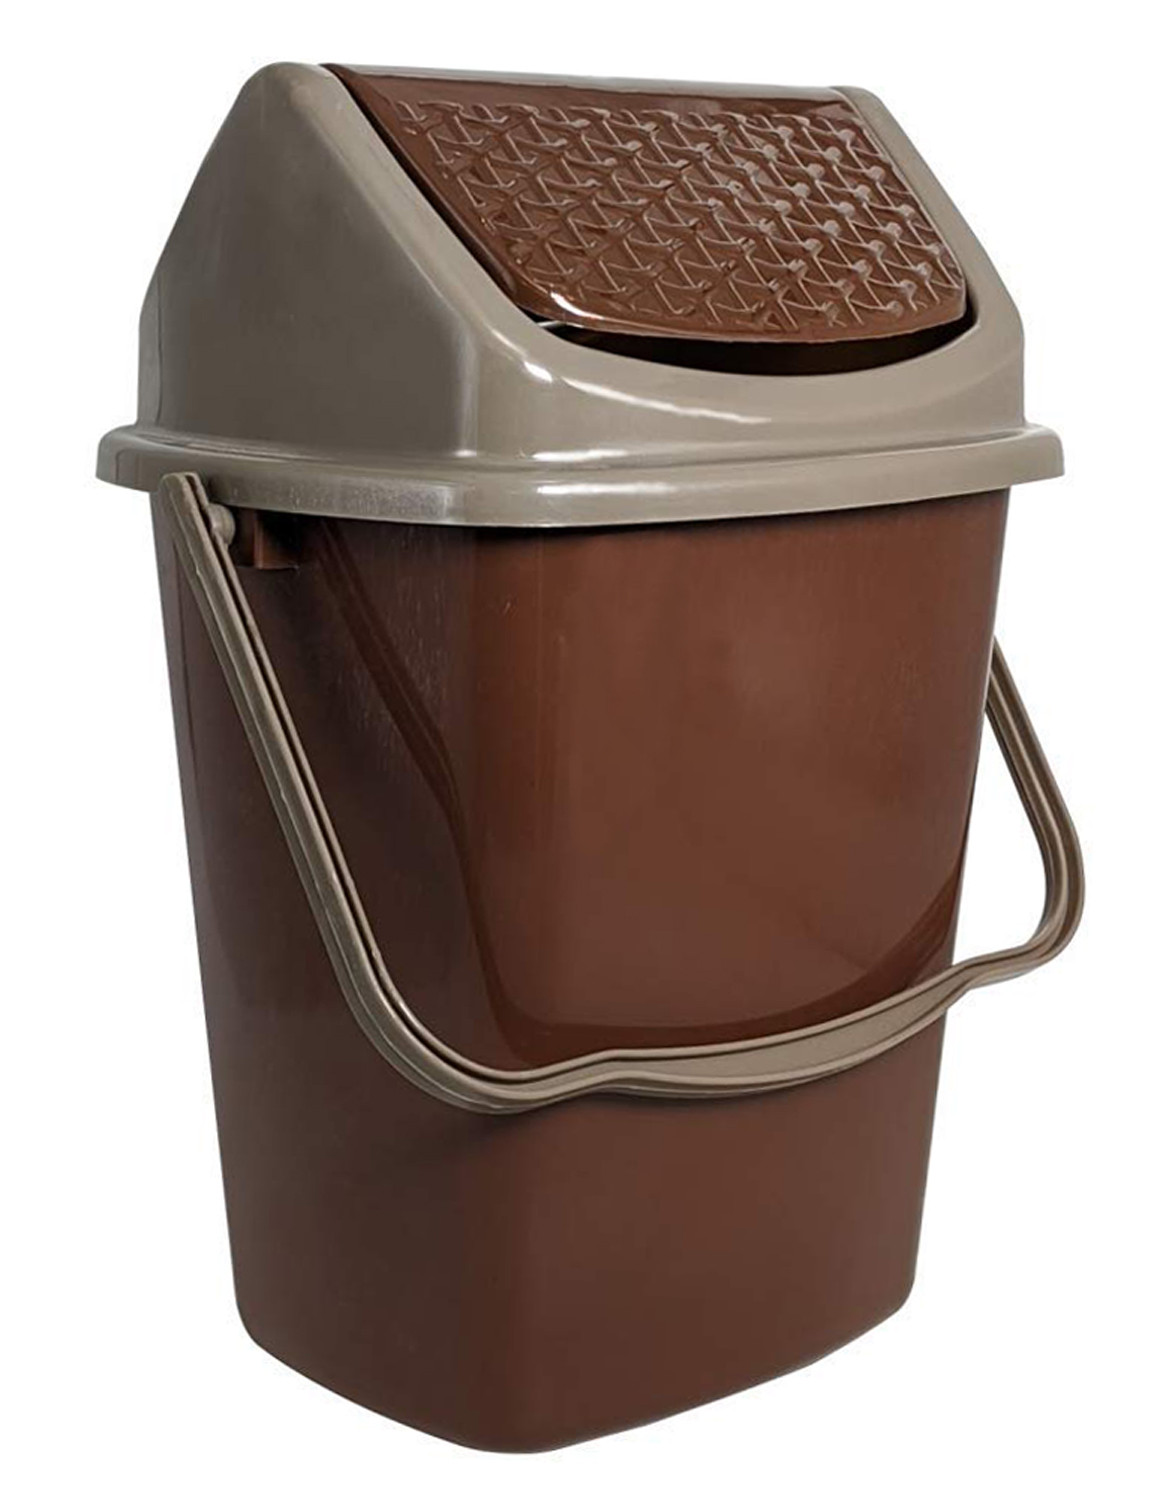 Kuber Industries Delight Plastic Swing  Garbage Waste Dustbin for Home, Office with Handle, 5 Liters (Green & Brown)